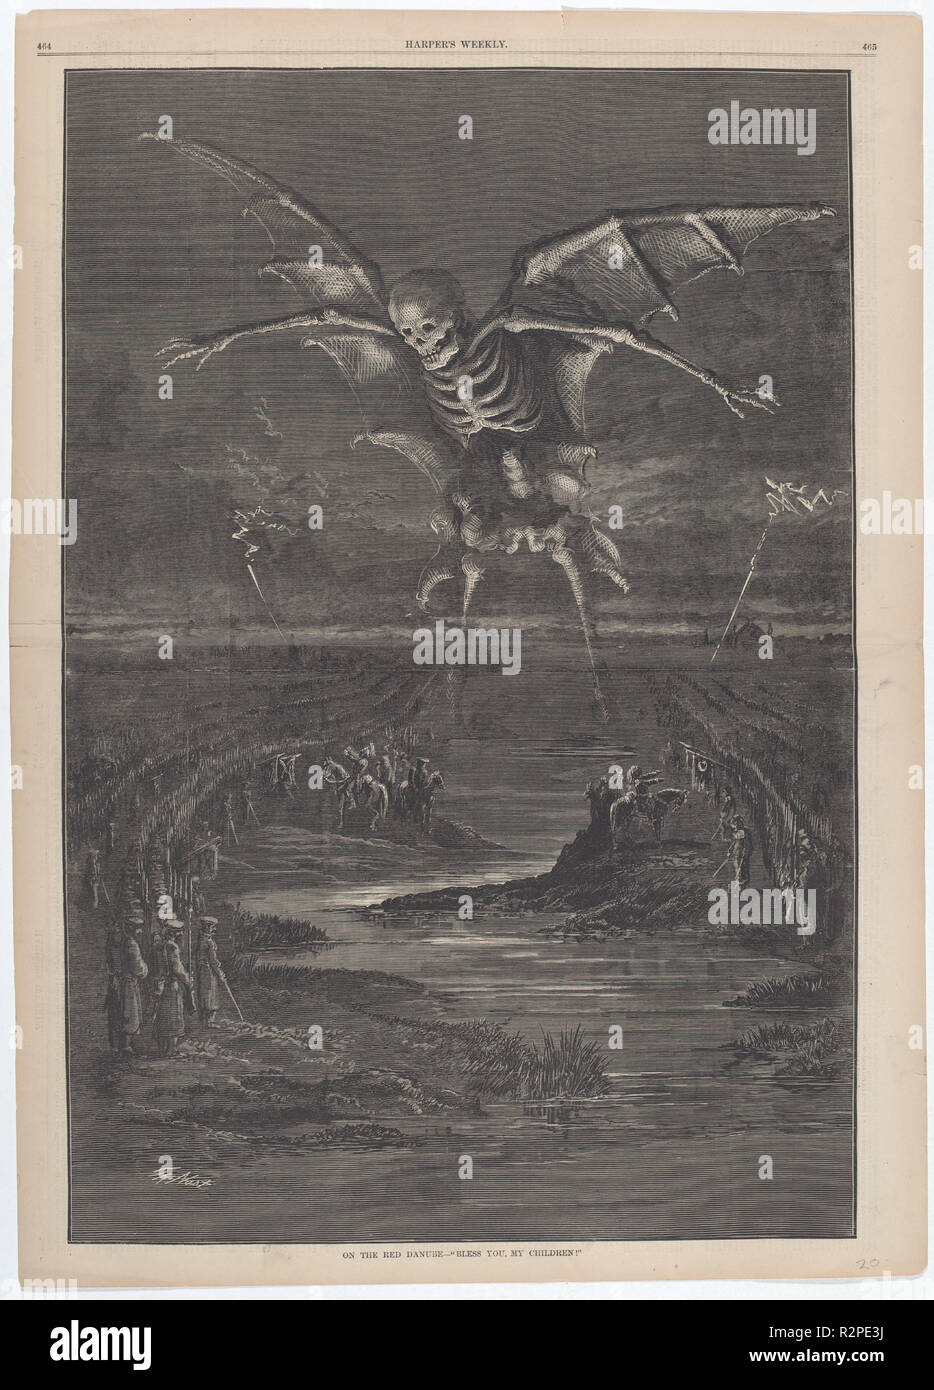 On the Red Danube. Dated: 1877. Dimensions: image: 50.96 × 34.45 cm (20 1/16 × 13 9/16 in.)  sheet: 55.25 × 39.69 cm (21 3/4 × 15 5/8 in.). Medium: wood engraving in black on newsprint, two-page centerfold. Museum: National Gallery of Art, Washington DC. Author: Thomas Nast. Stock Photo